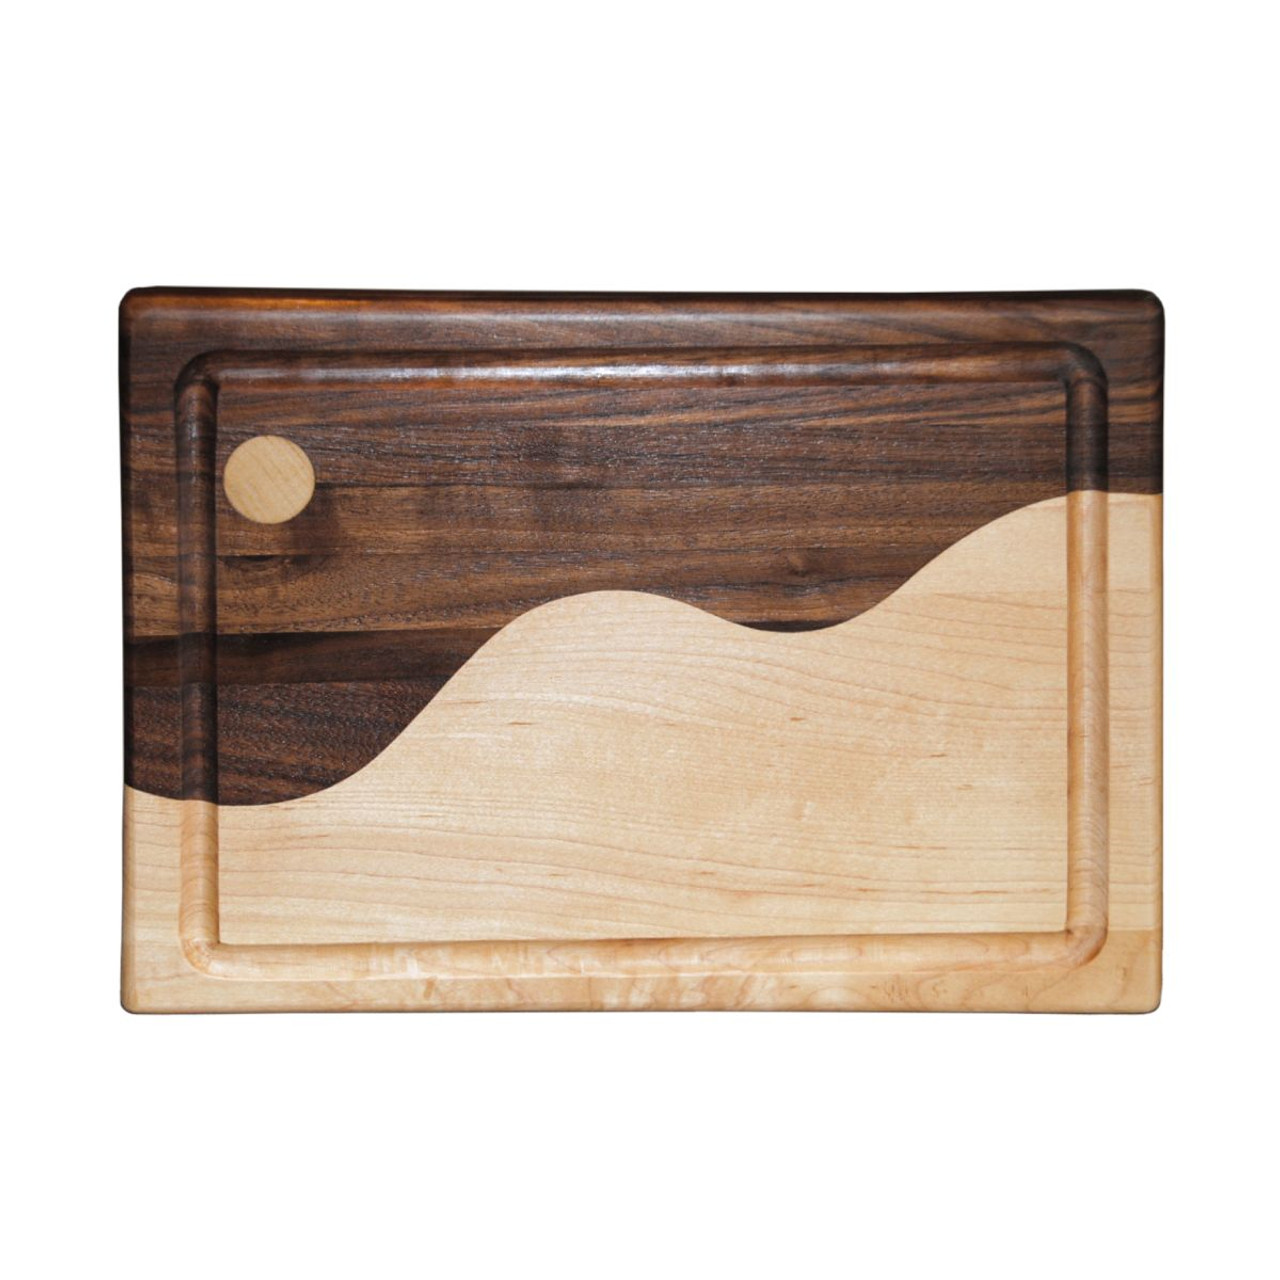 https://cdn11.bigcommerce.com/s-mh7fmcvlrc/images/stencil/1280x1280/products/7132/17588/2809-moonscape-cutting-board-black-walnut-and-maple__06918.1677873361.jpg?c=2